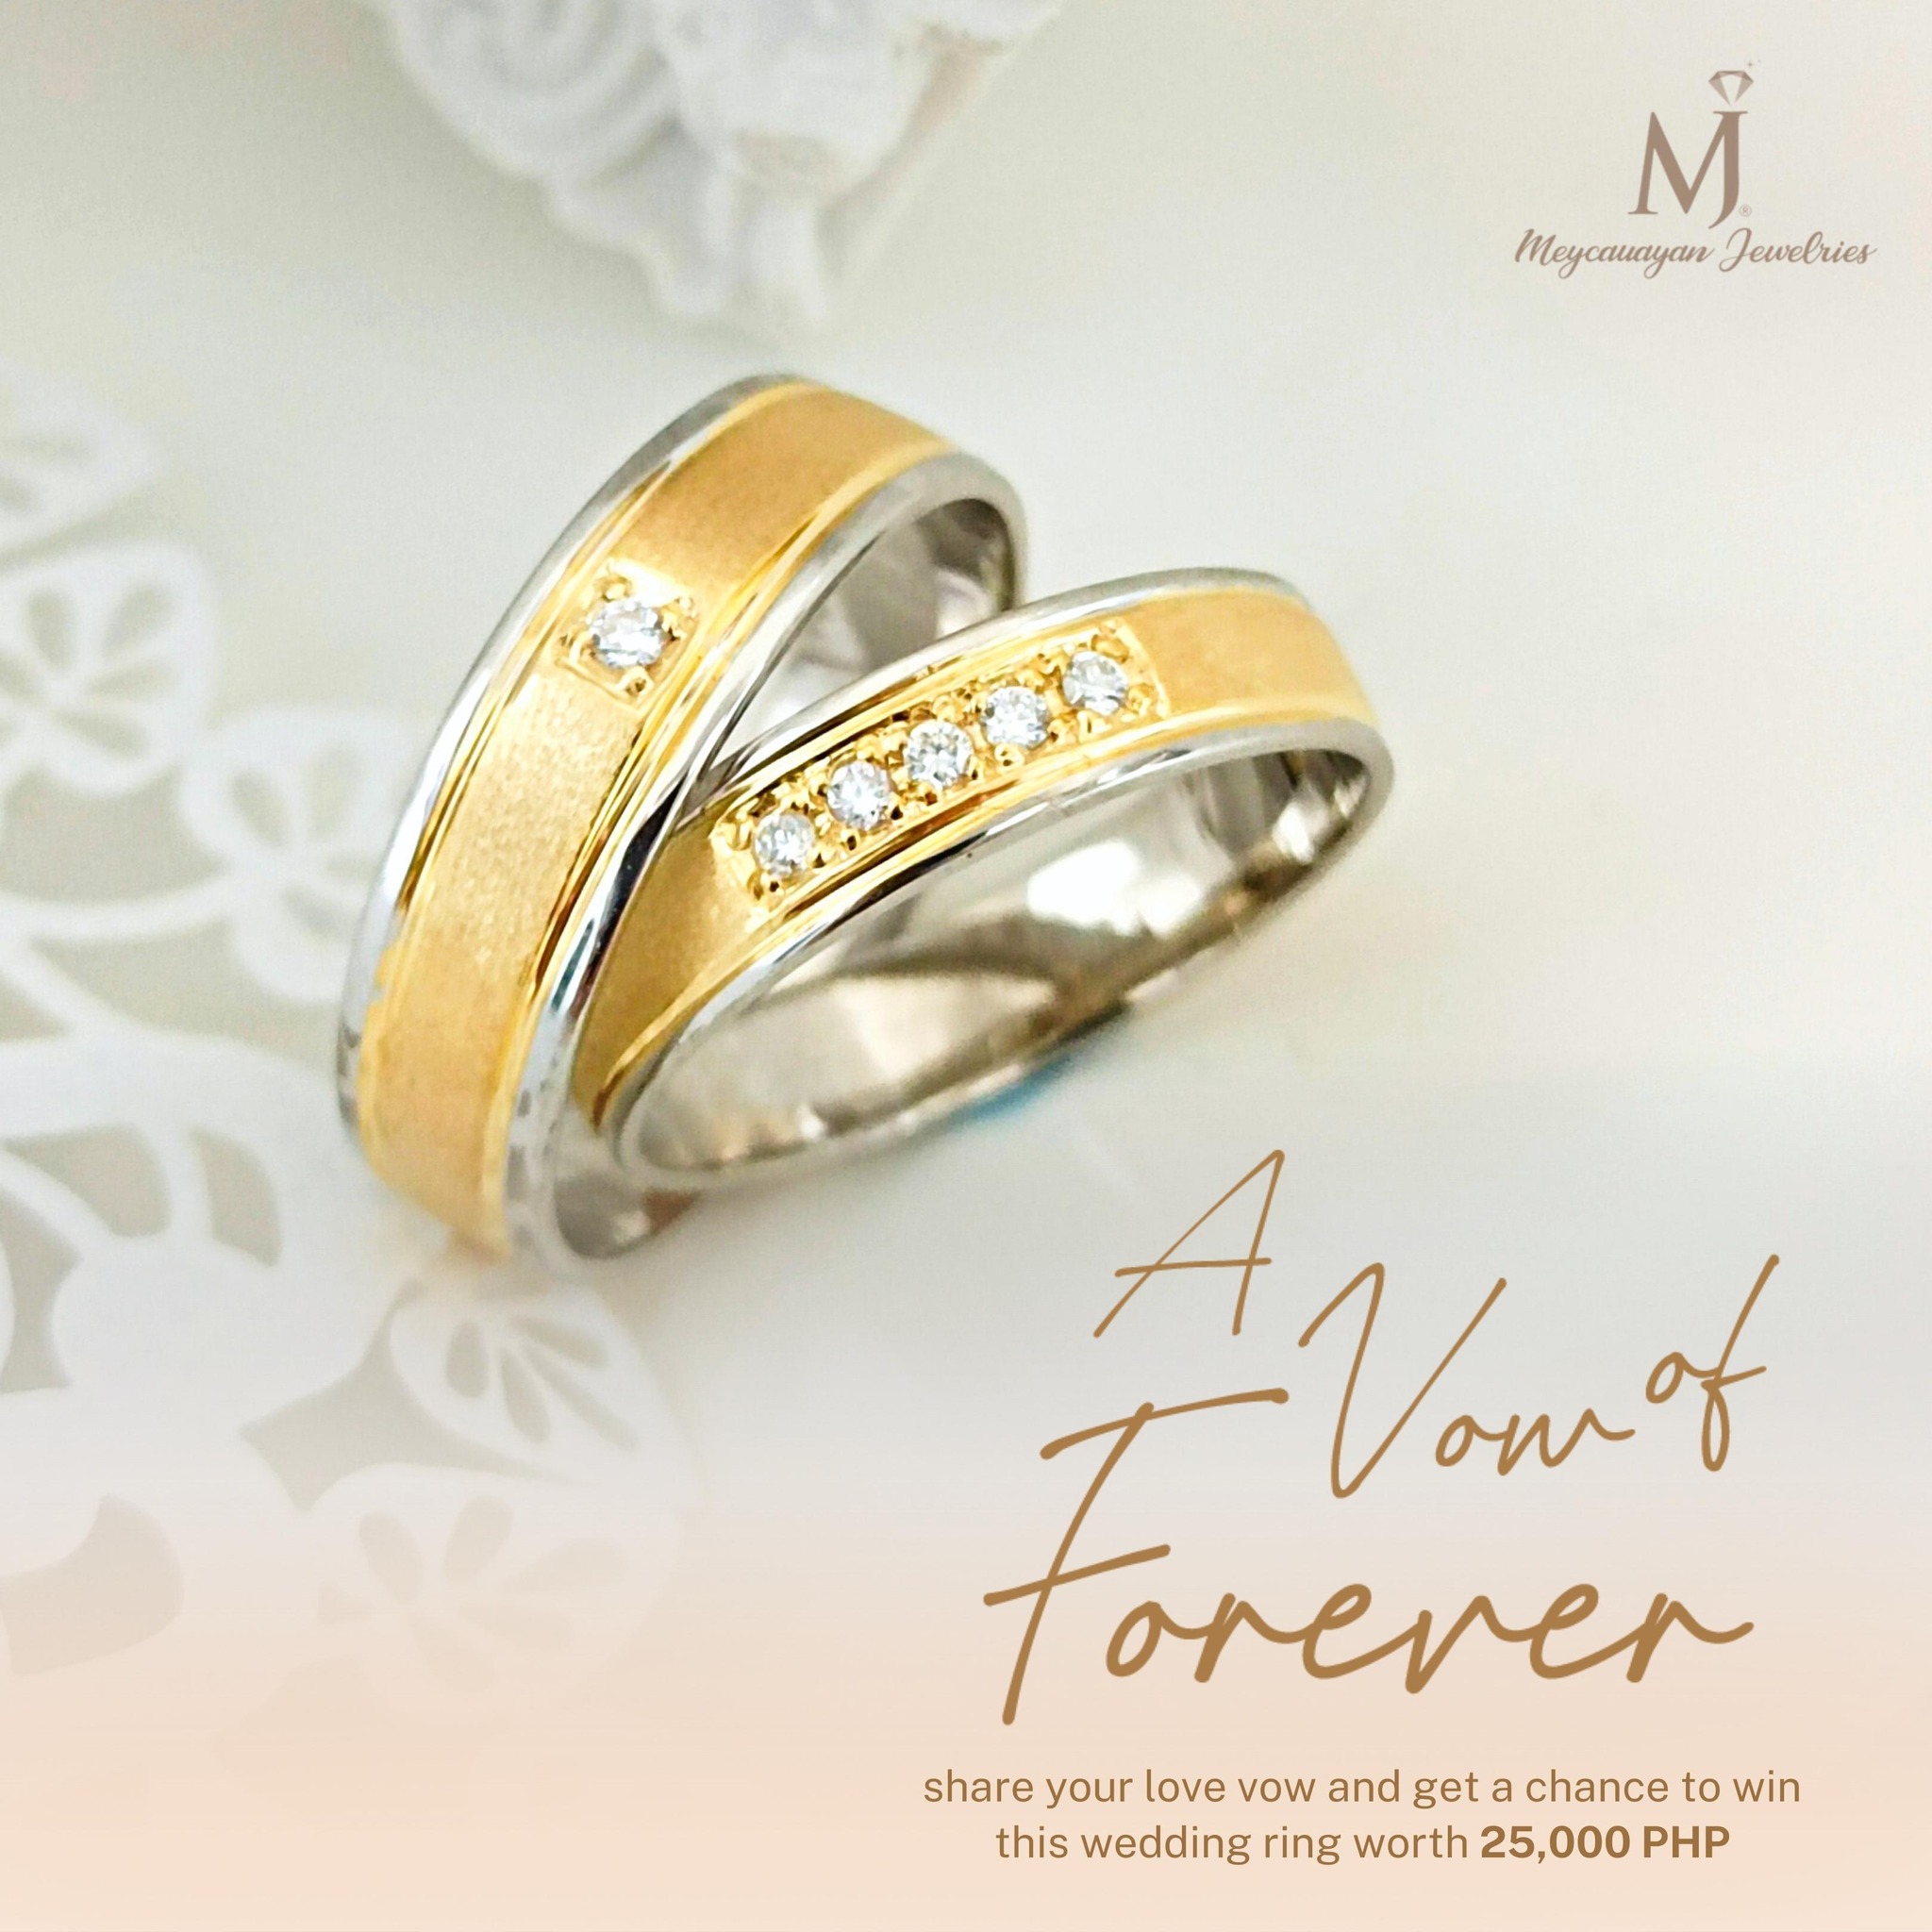 Share your Vow and get a chance to WIN a pair of Wedding Rings worth P25K! 